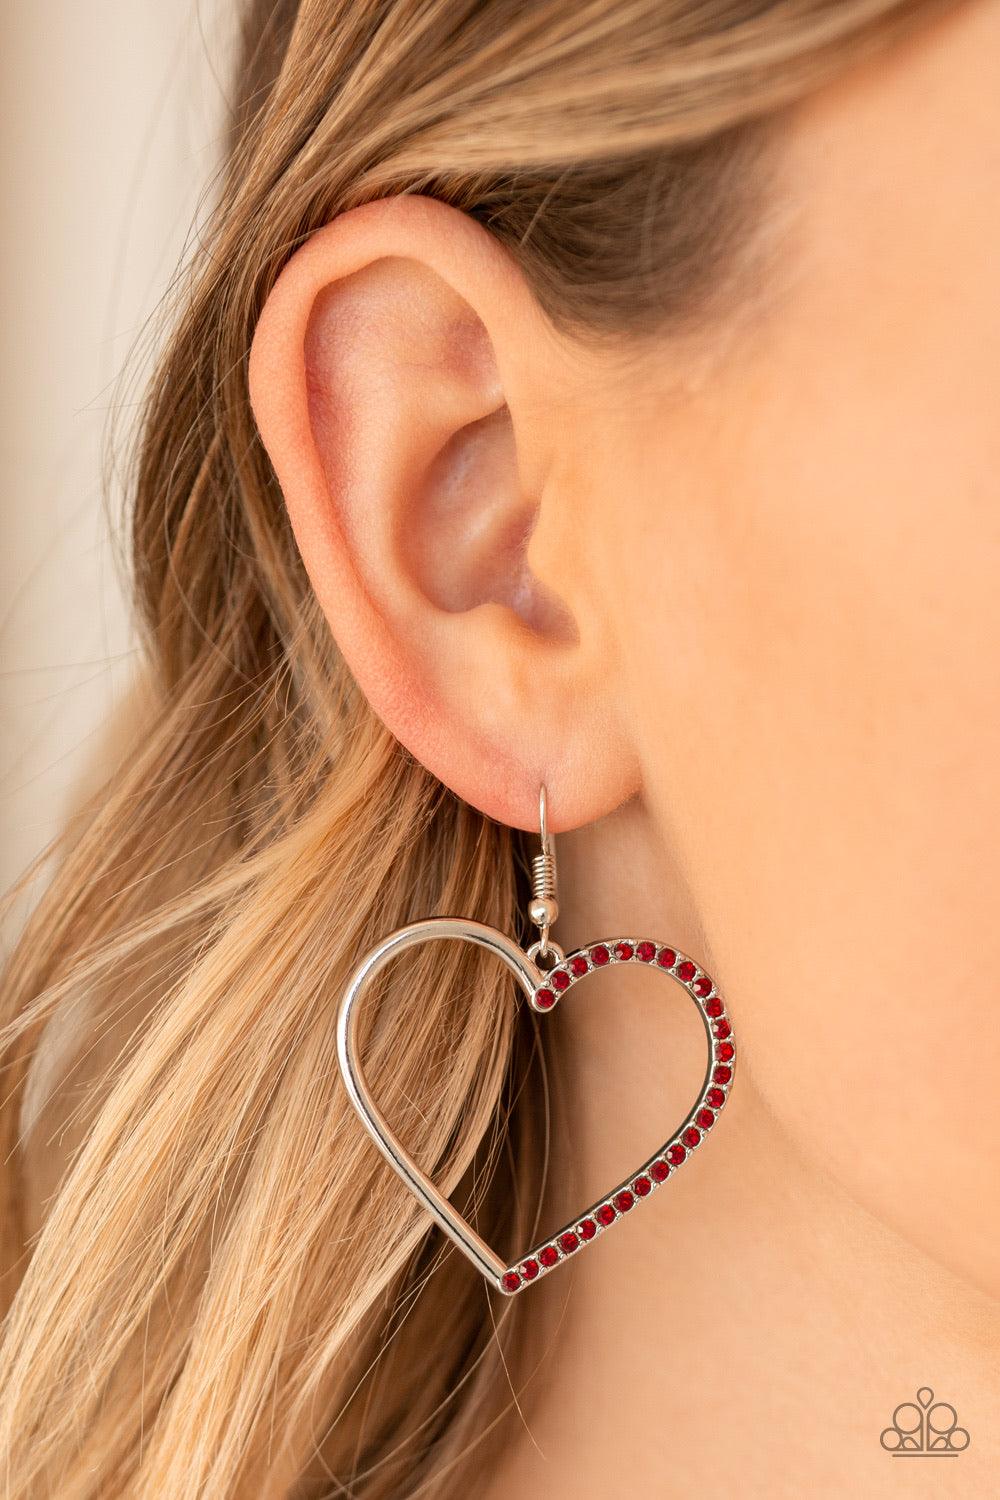 Paparazzi Accessories First Date Dazzle - Red One half of a shimmery silver heart silhouette has been encrusted in glassy red rhinestones, creating a charming frame. Earring attaches to a standard fishhook fitting. Jewelry